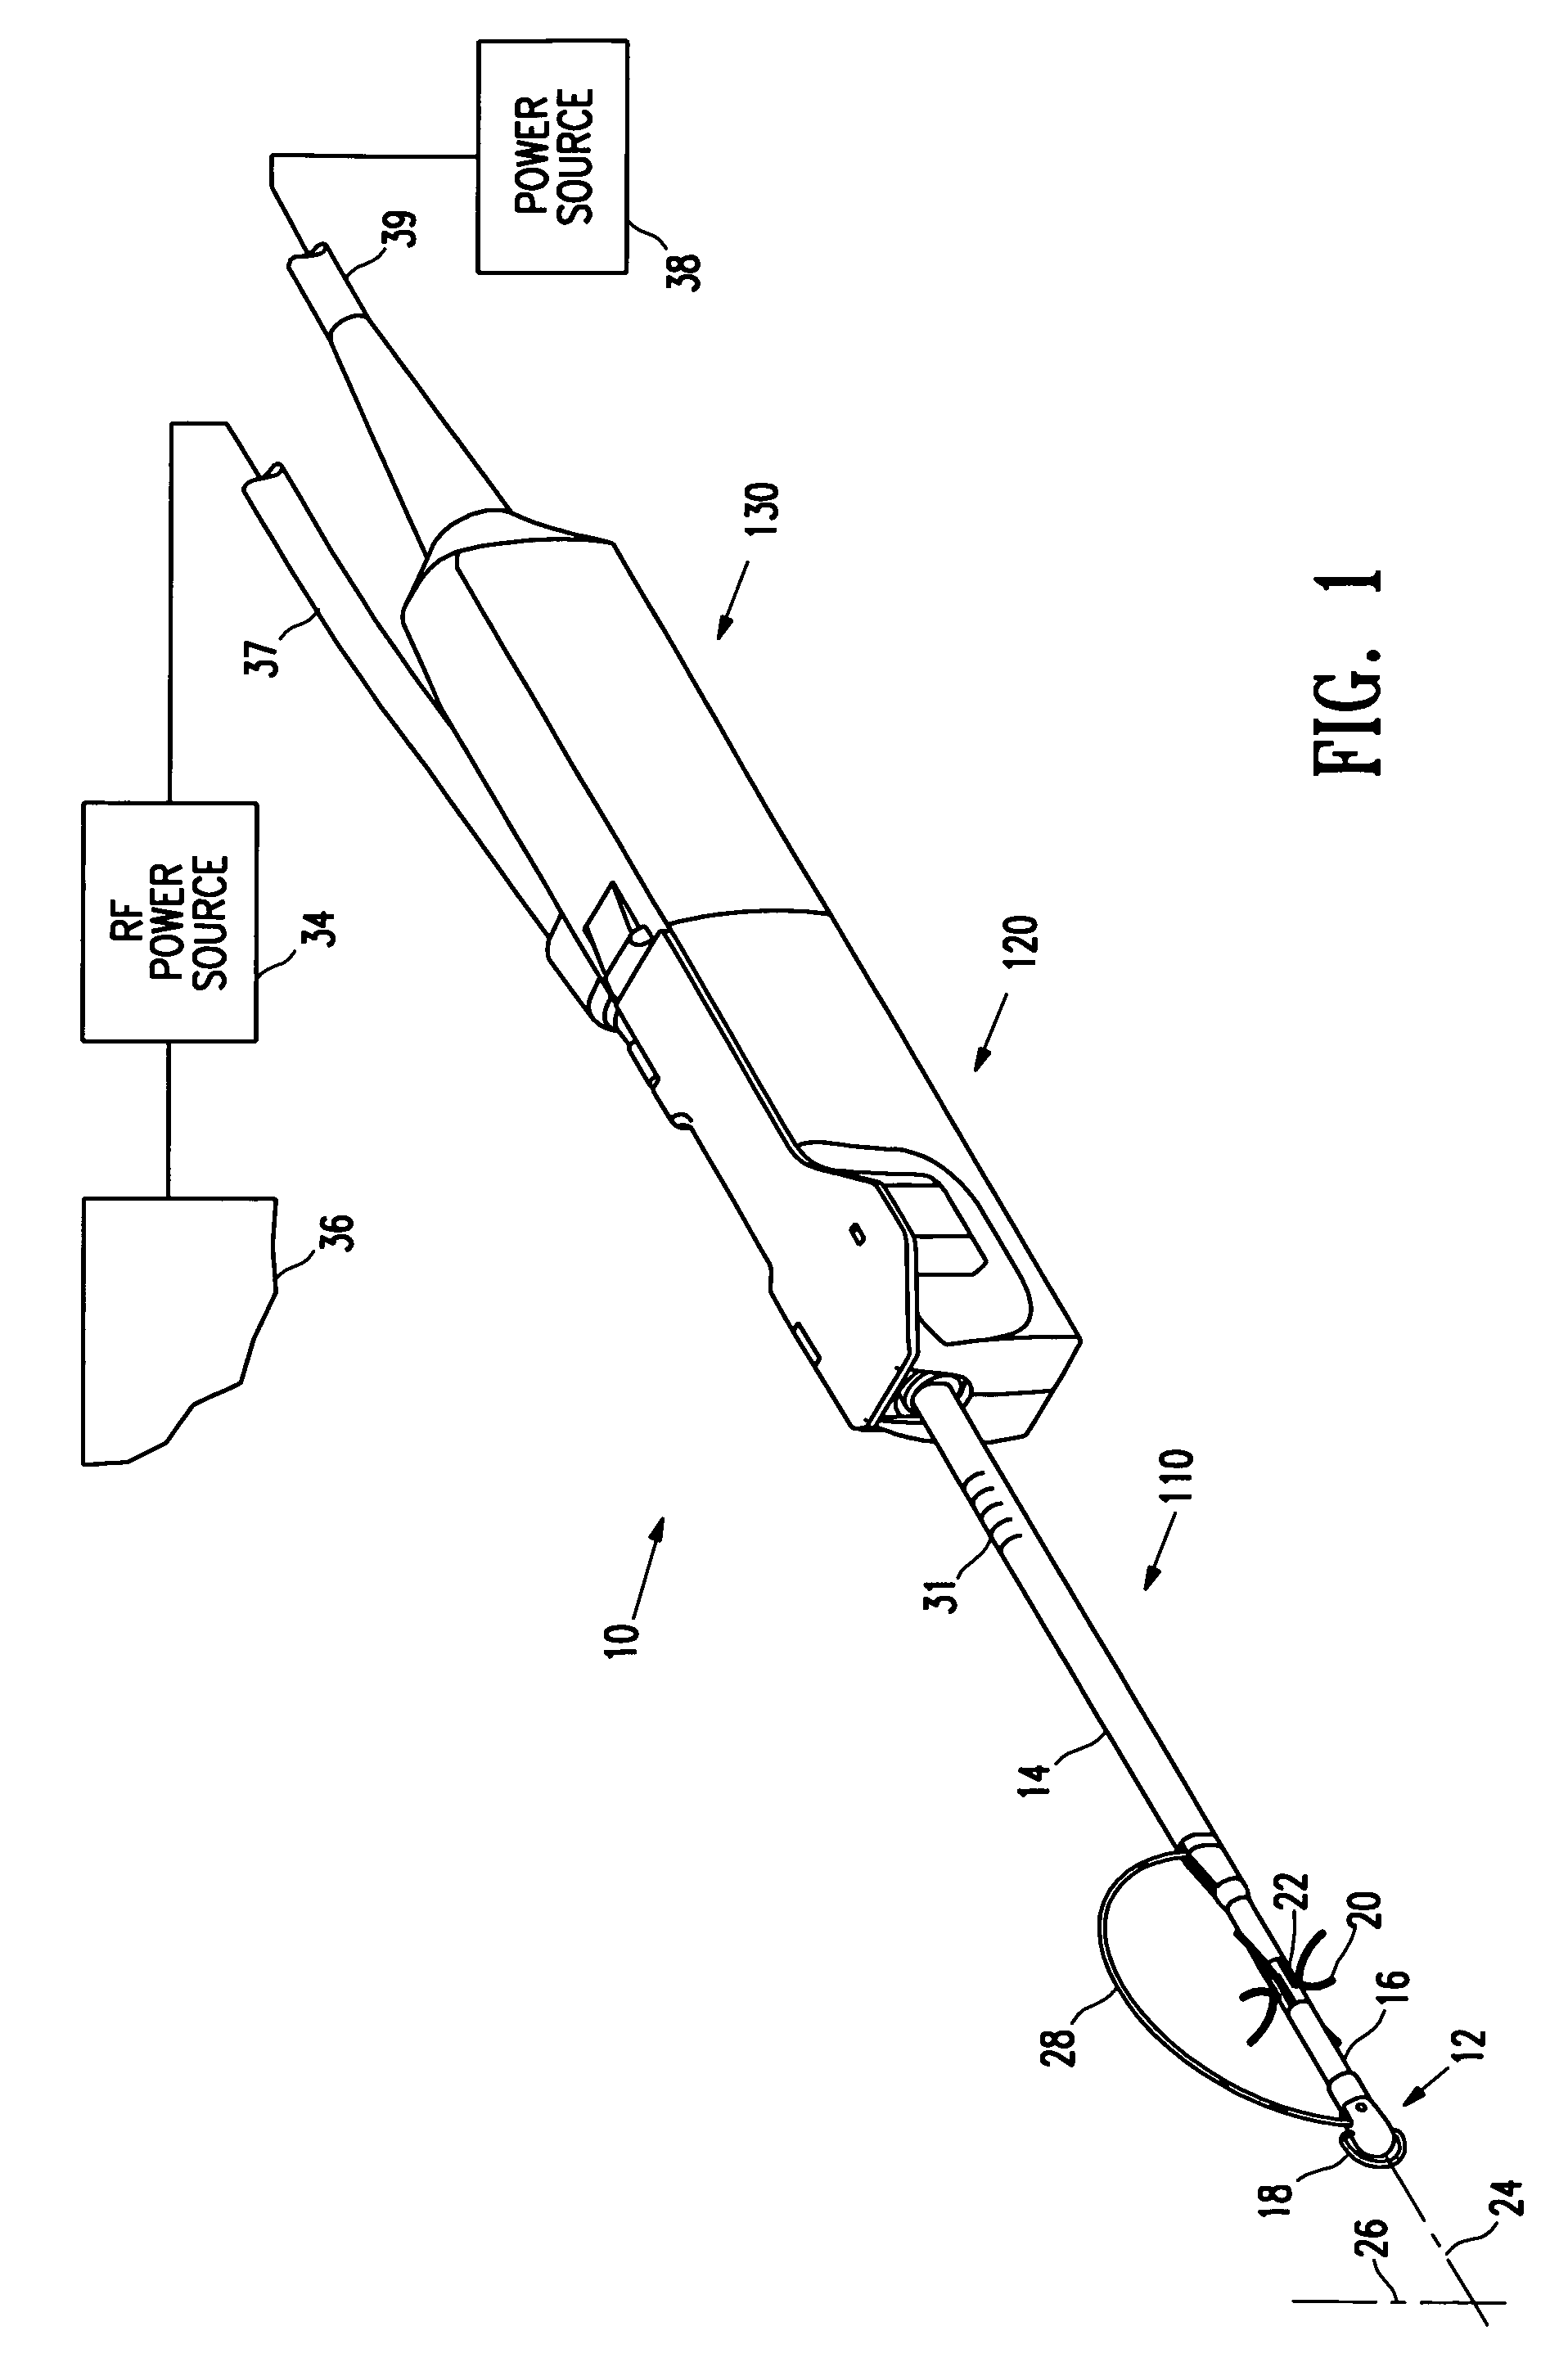 Biopsy anchor device with cutter